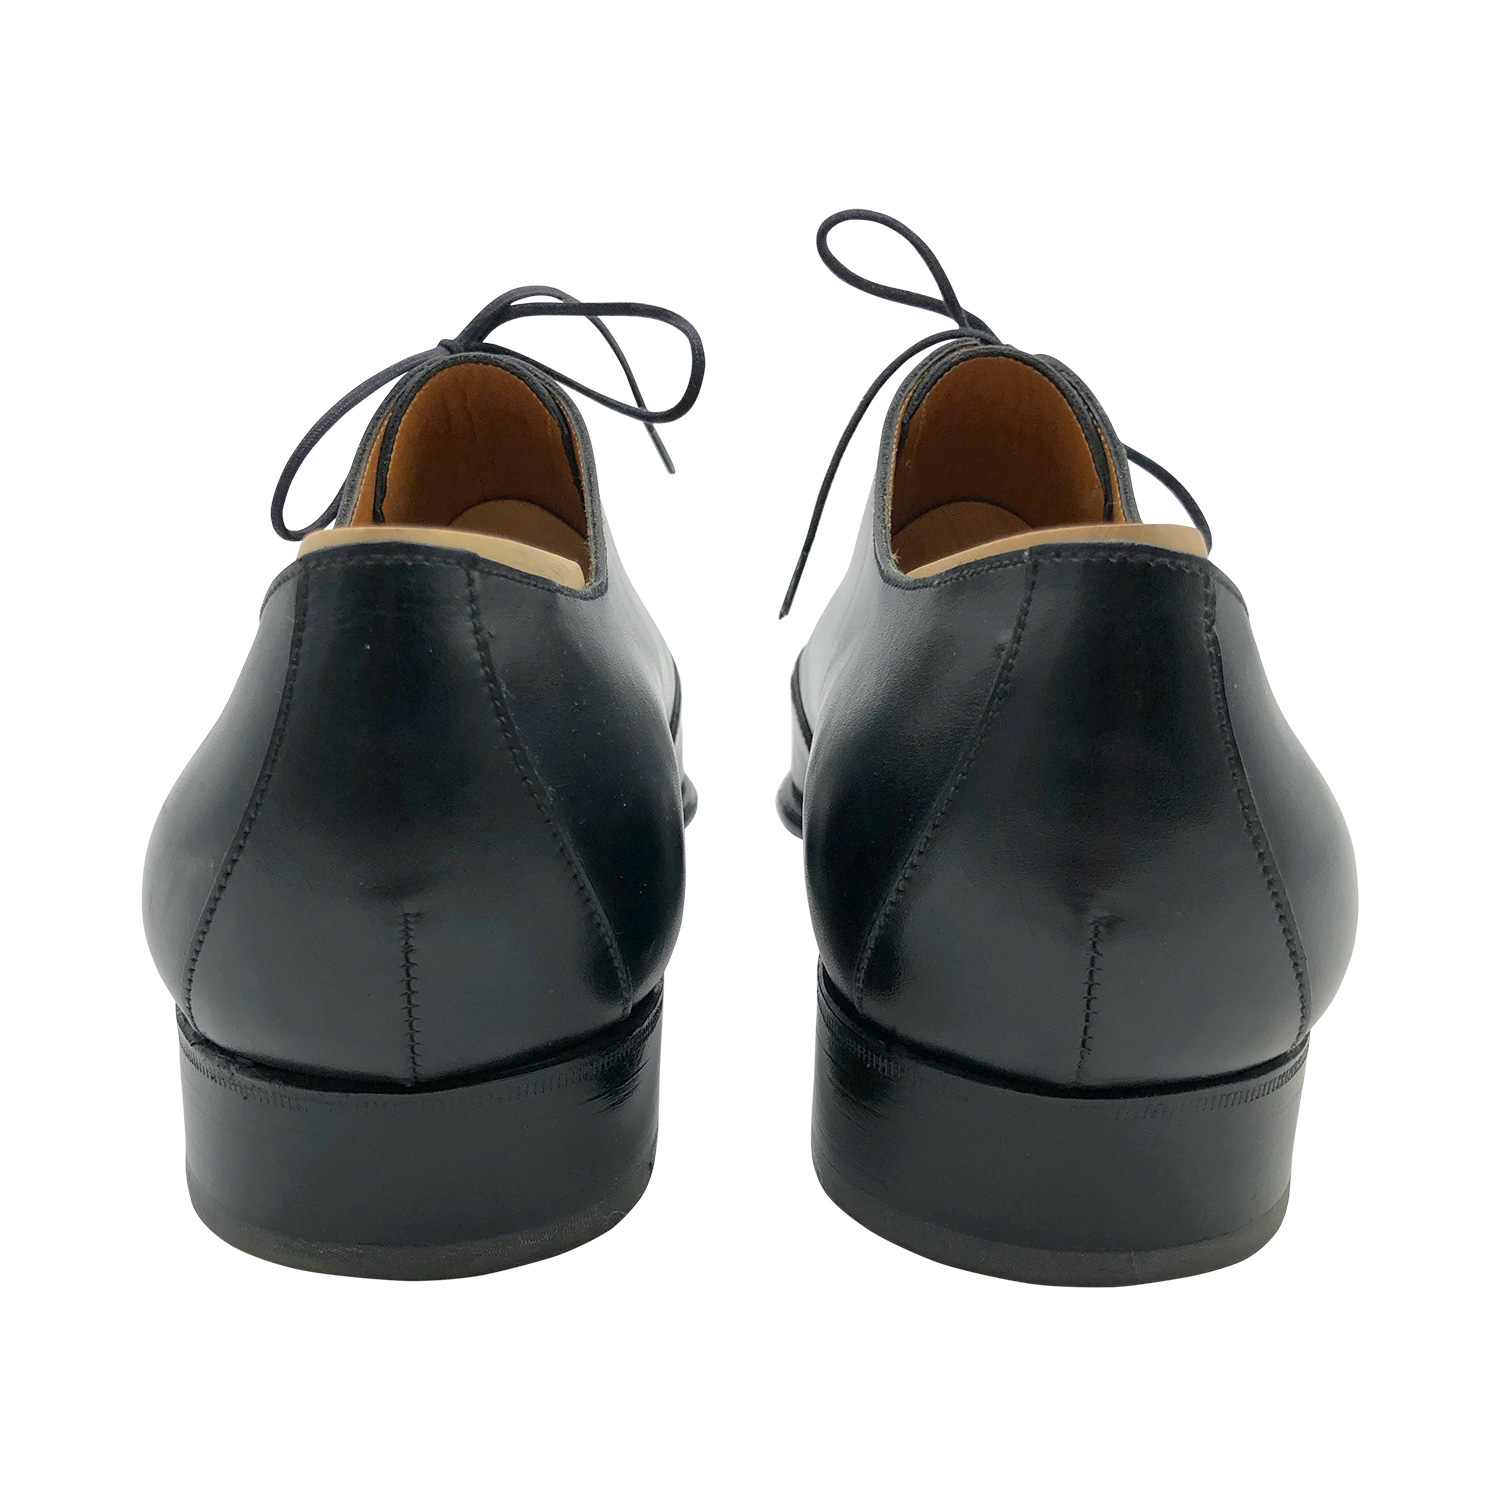 JM Weston Oxford shoes in black leather with shoe tree - DOWNTOWN ...